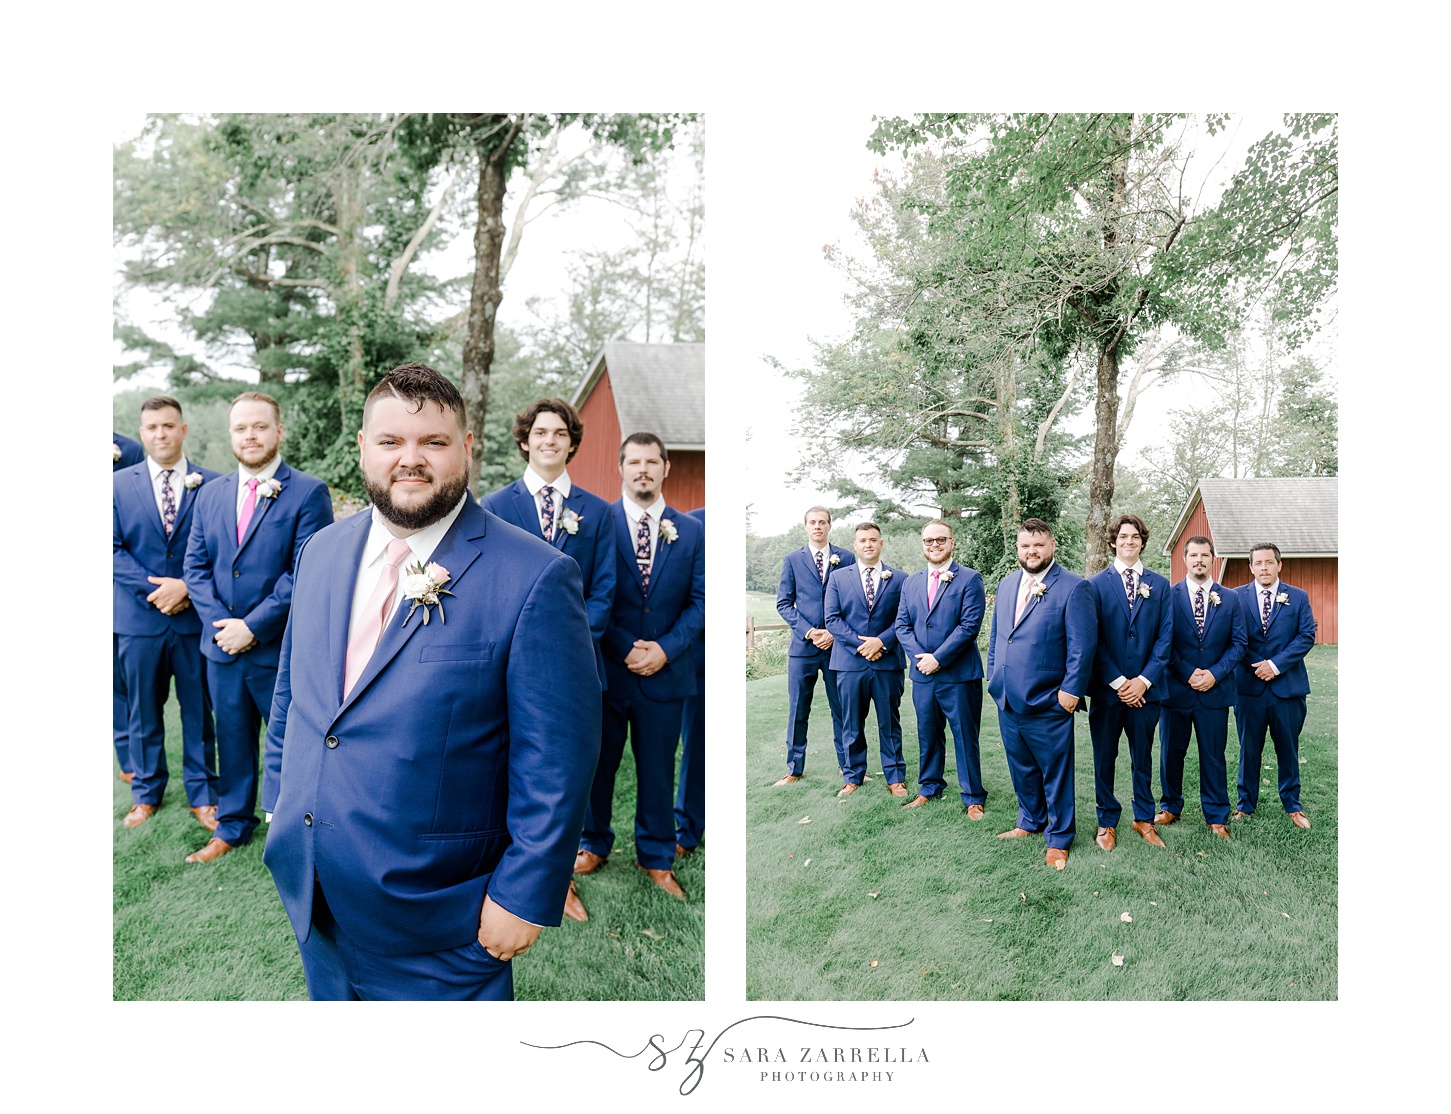 groom stands in front of groomsmen in navy suits on lawn at Blissful Meadows